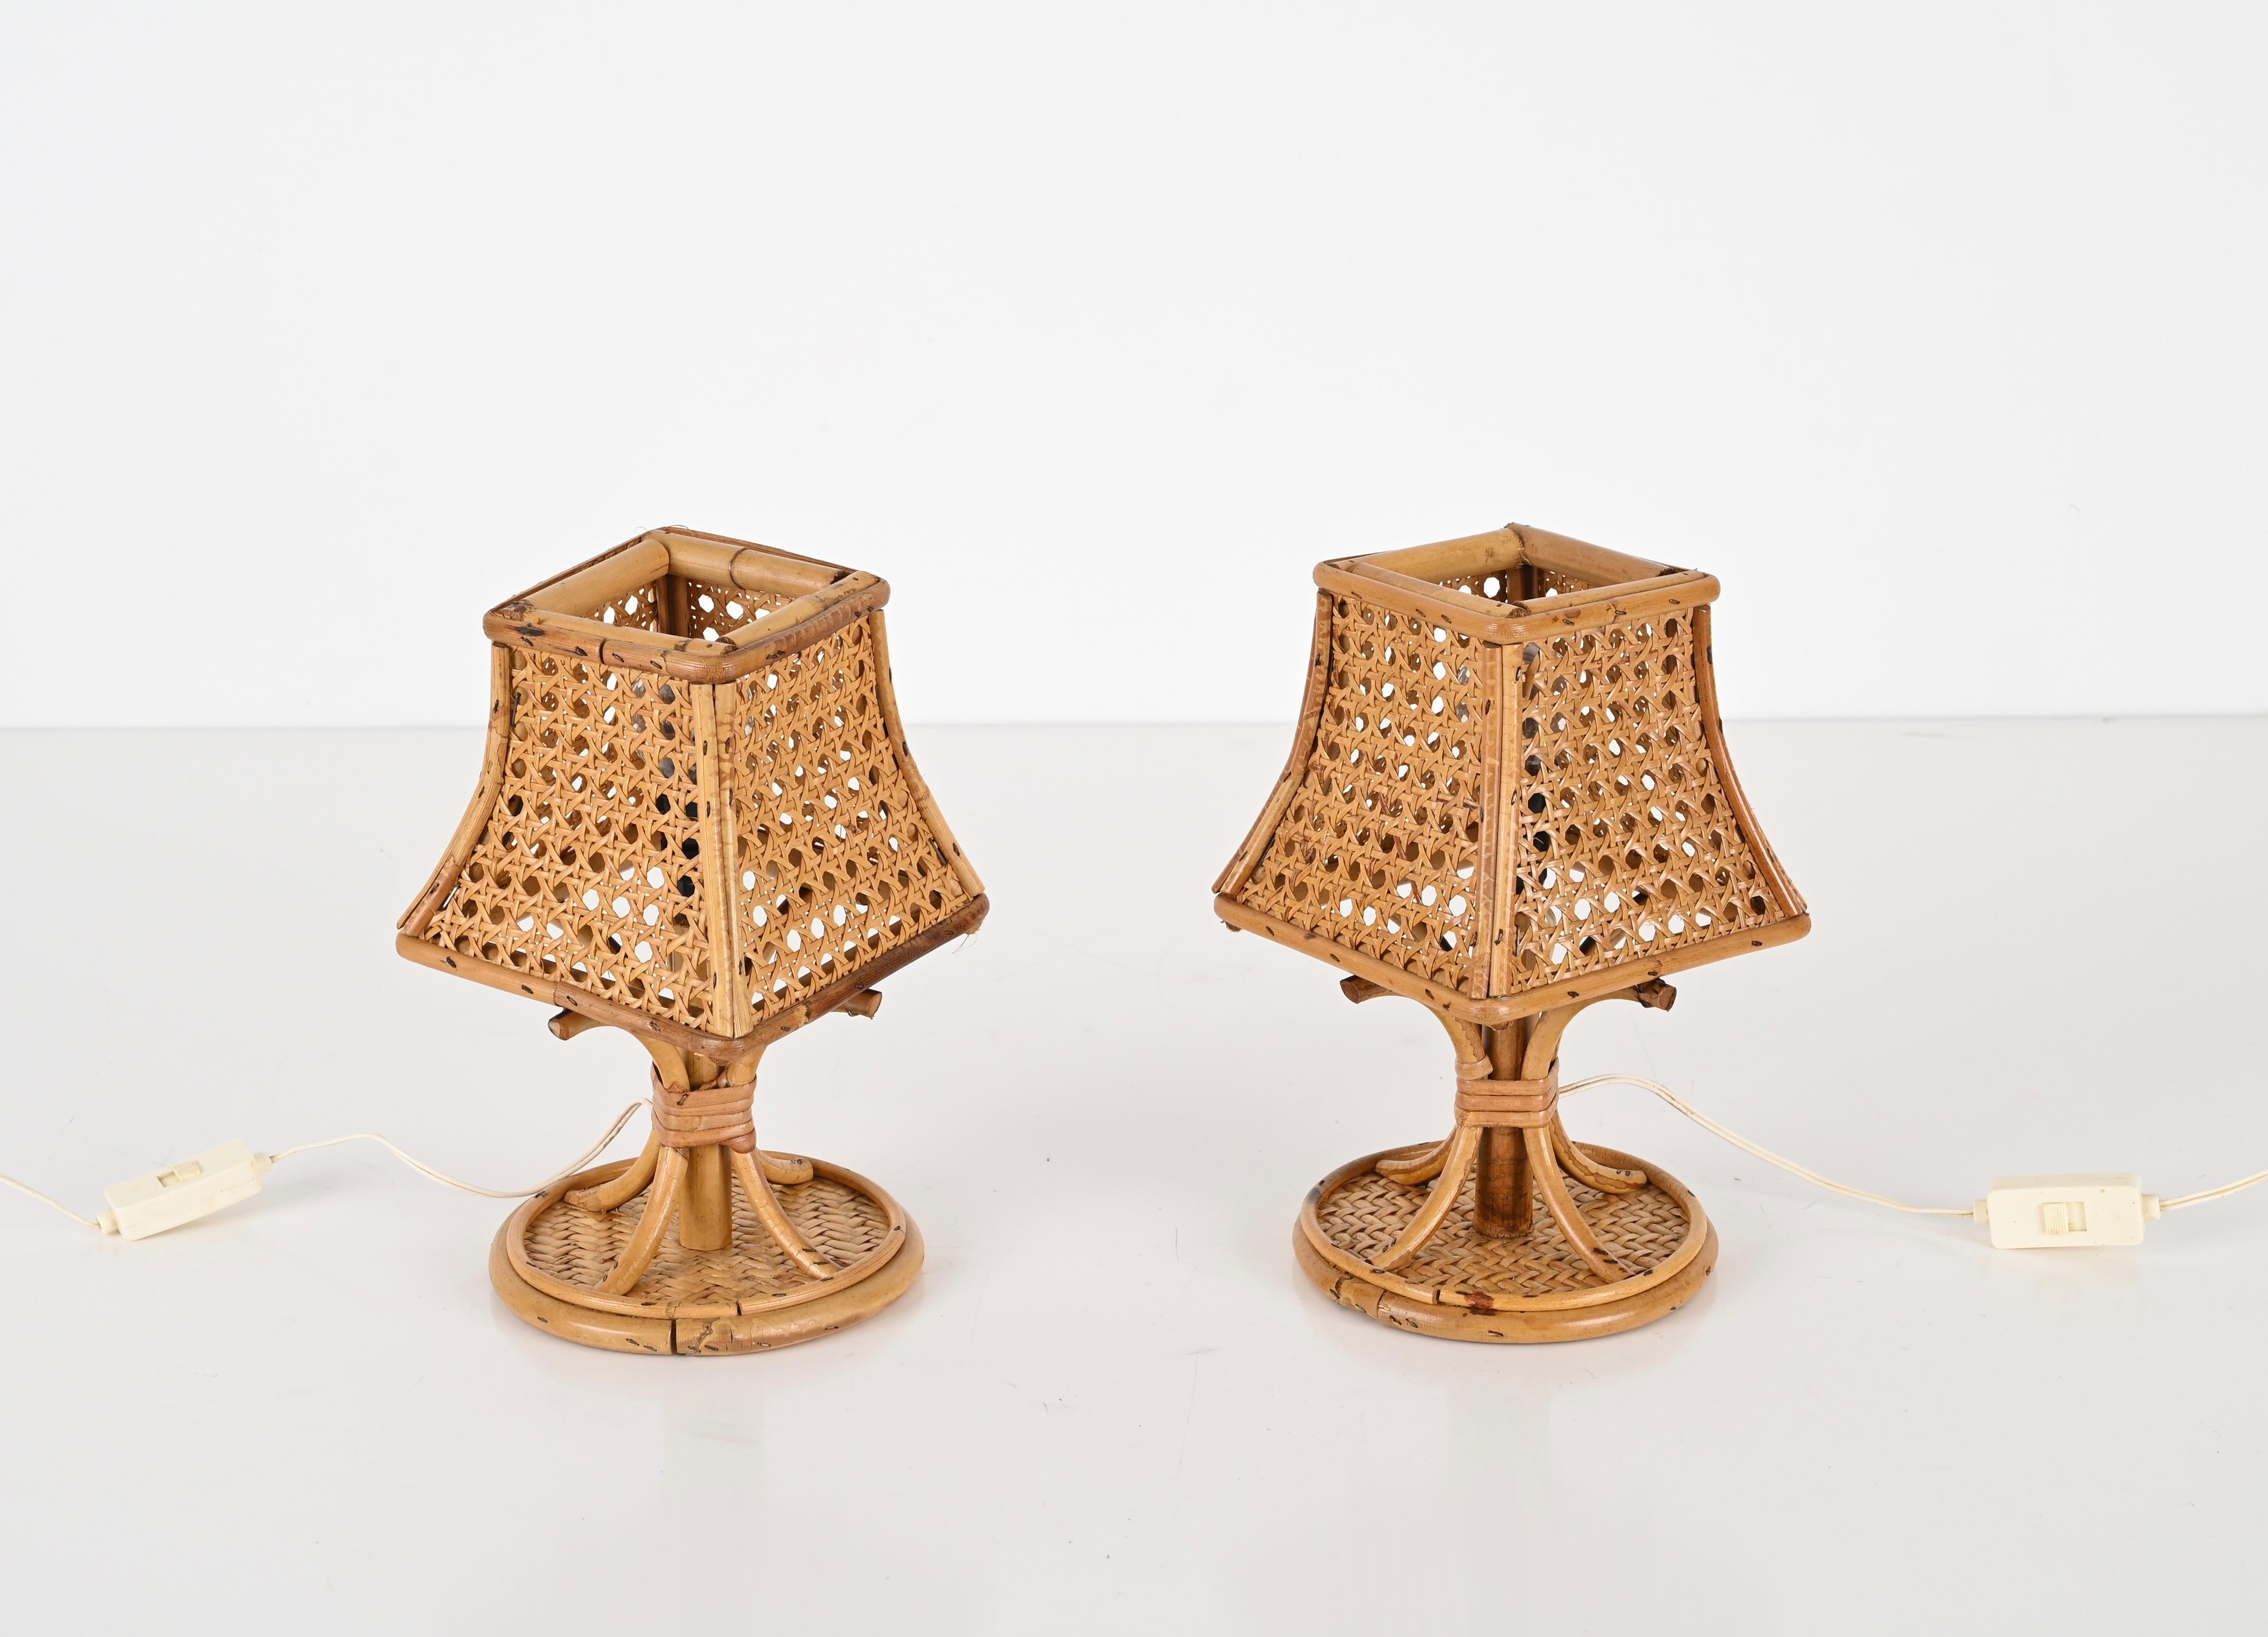 Gorgeous pair of Mid-Century table lamps fully made in rattan, wicker and Vienna straw. These fantastic French Riviera style lamps were produced in Italy during the 1960s, clearly in the style of Louis Sognot.  

By having a wicker and Vienna straw